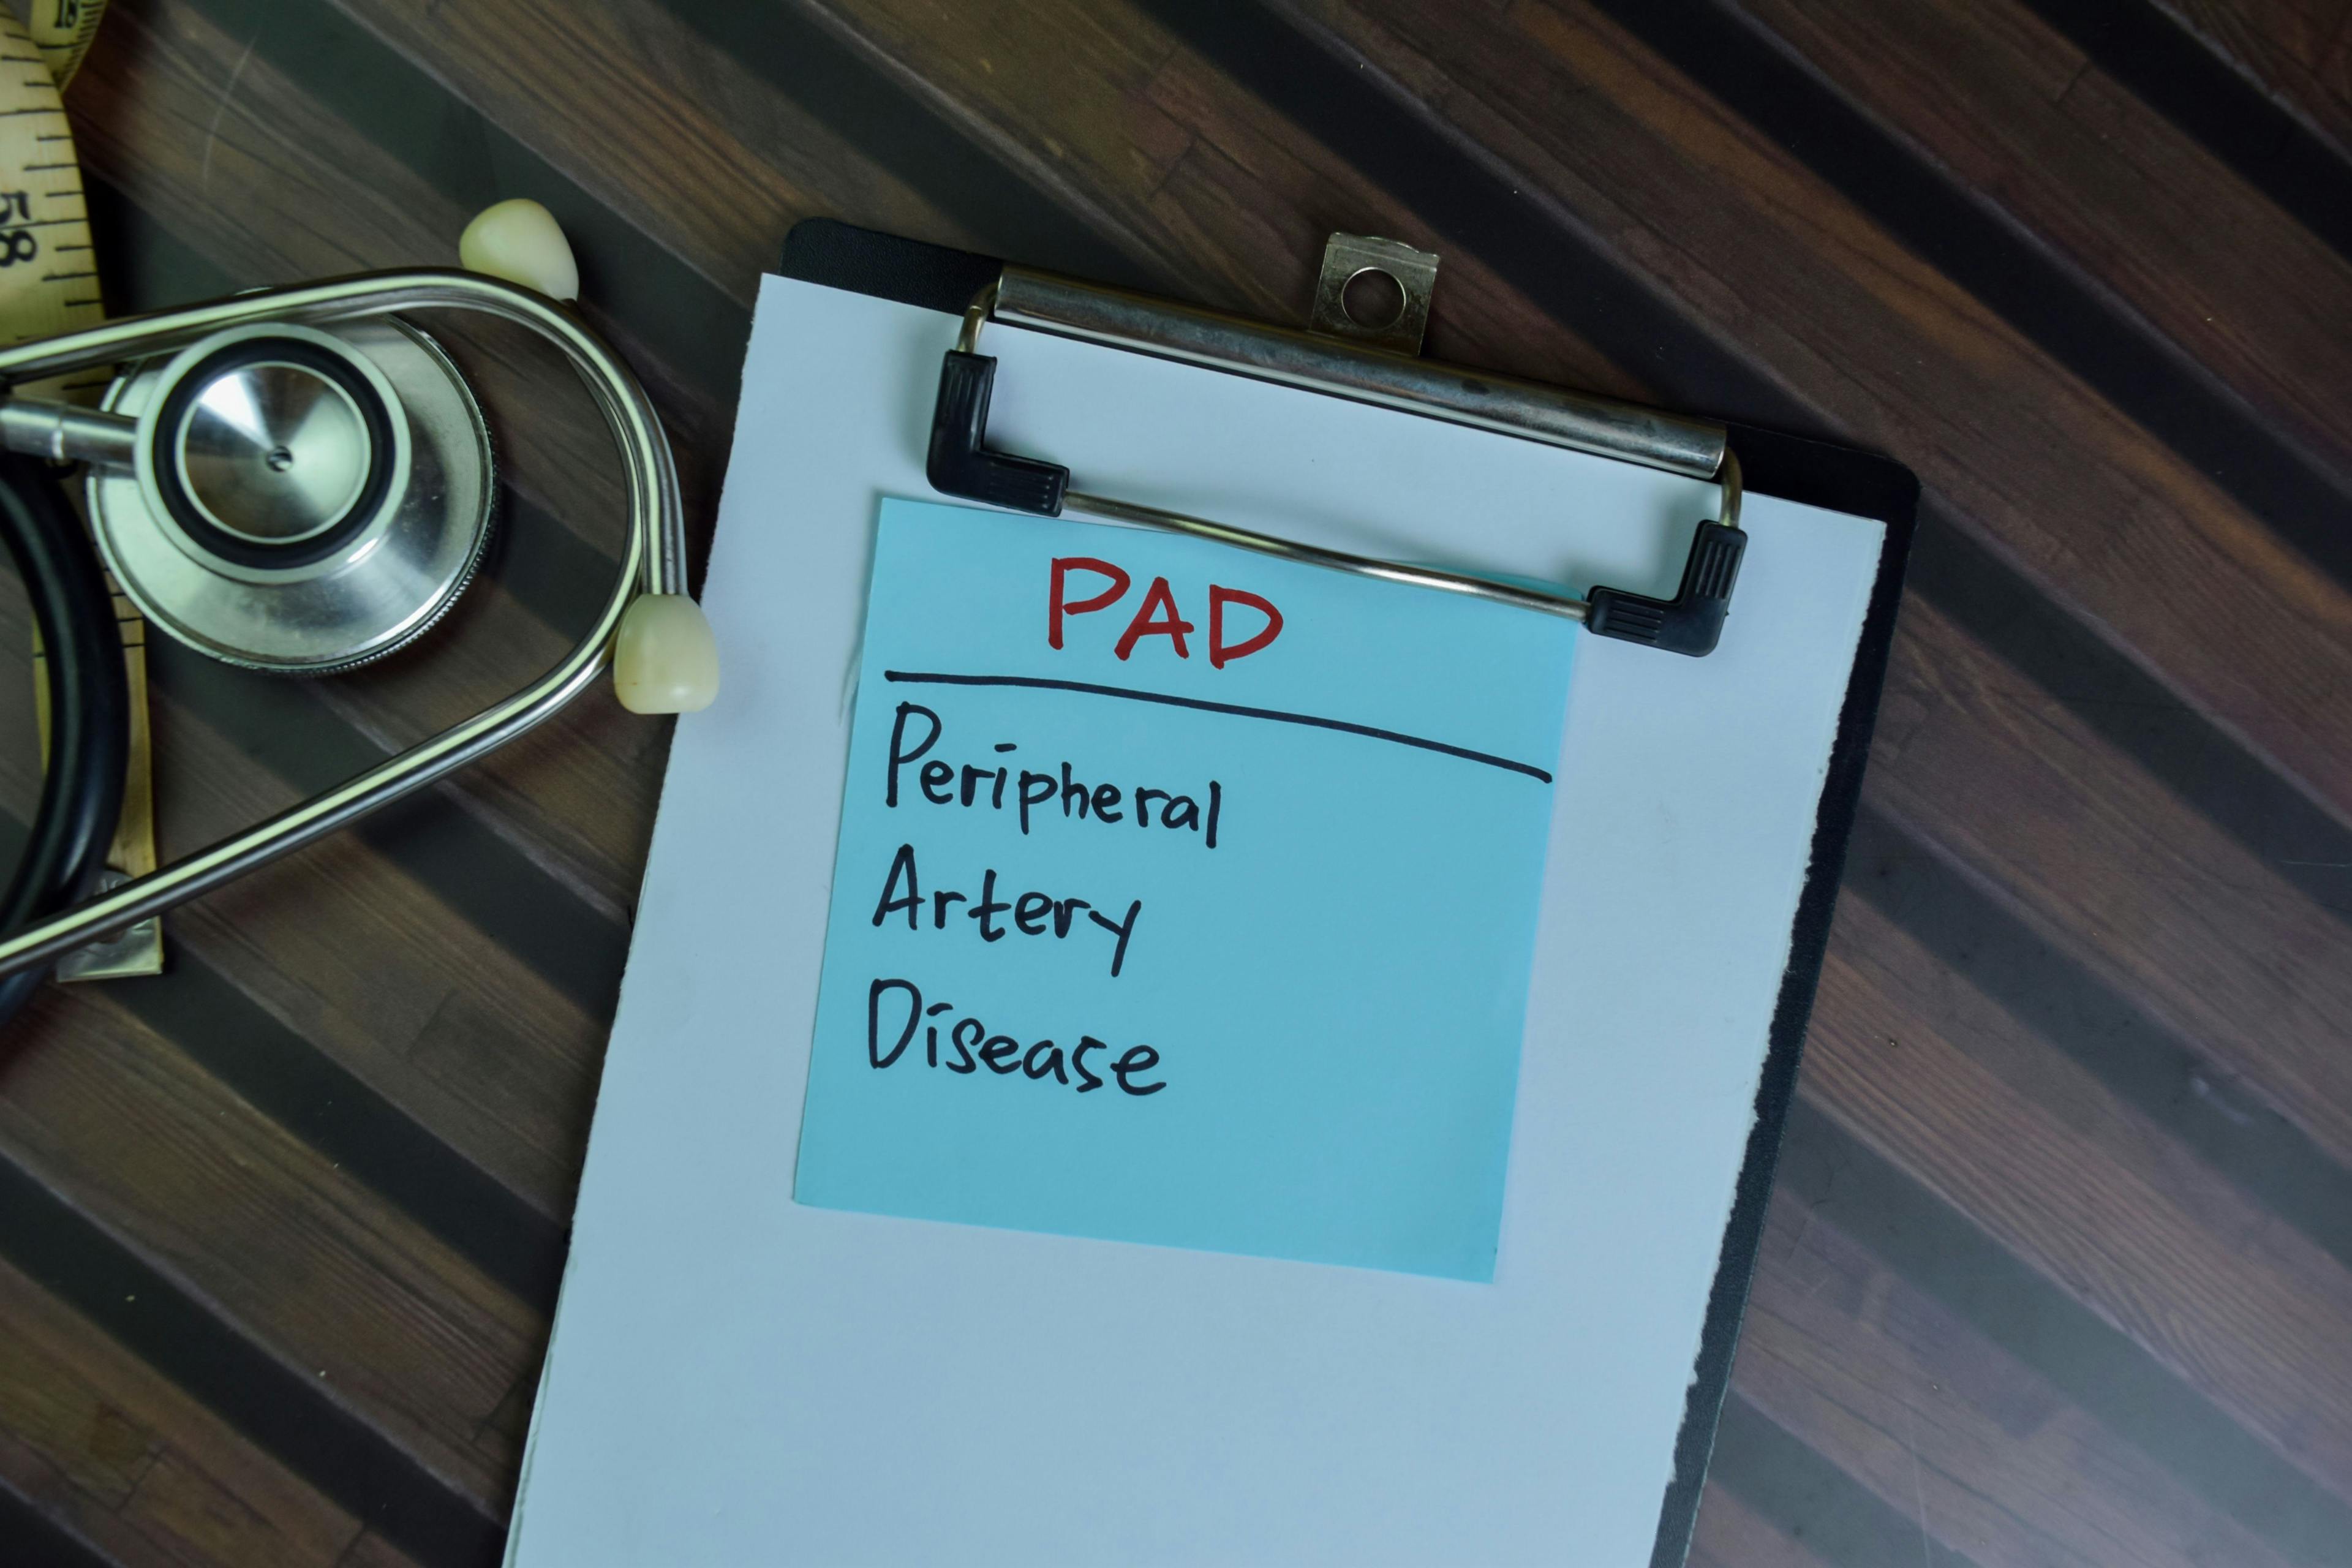 PAD - Peripheral Artery Disease written on sticky note isolated on wooden table.